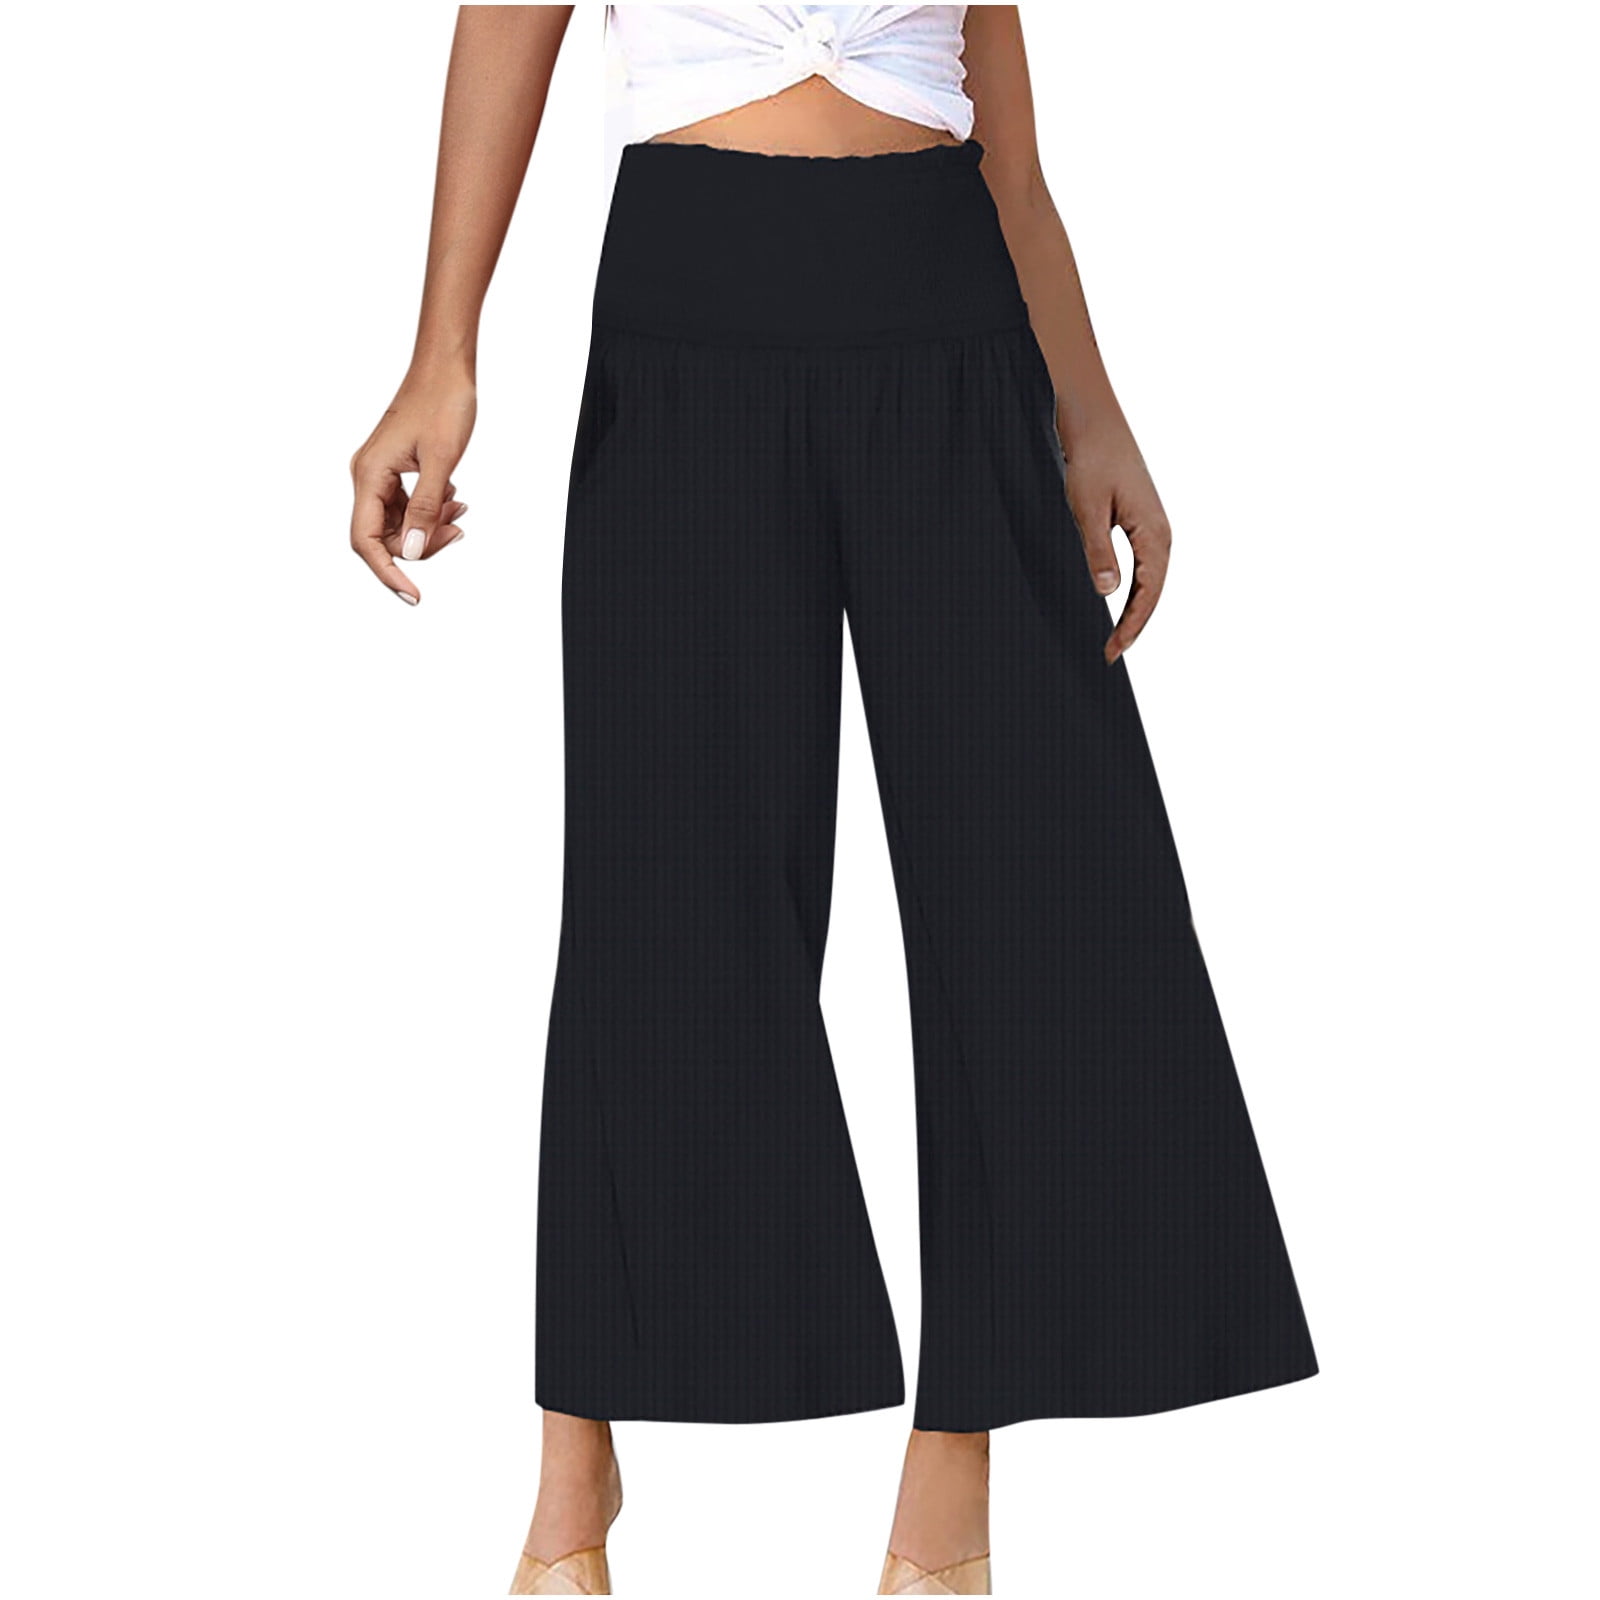 Xihbxyly Linen Pants for Women Womens Pants Cotton Linen Long Lounge Pants  Drawstring Back Elastic Waist Pants Casual Trousers with Pockets, Black, XL  Under 1 Dollar Items Only #4 